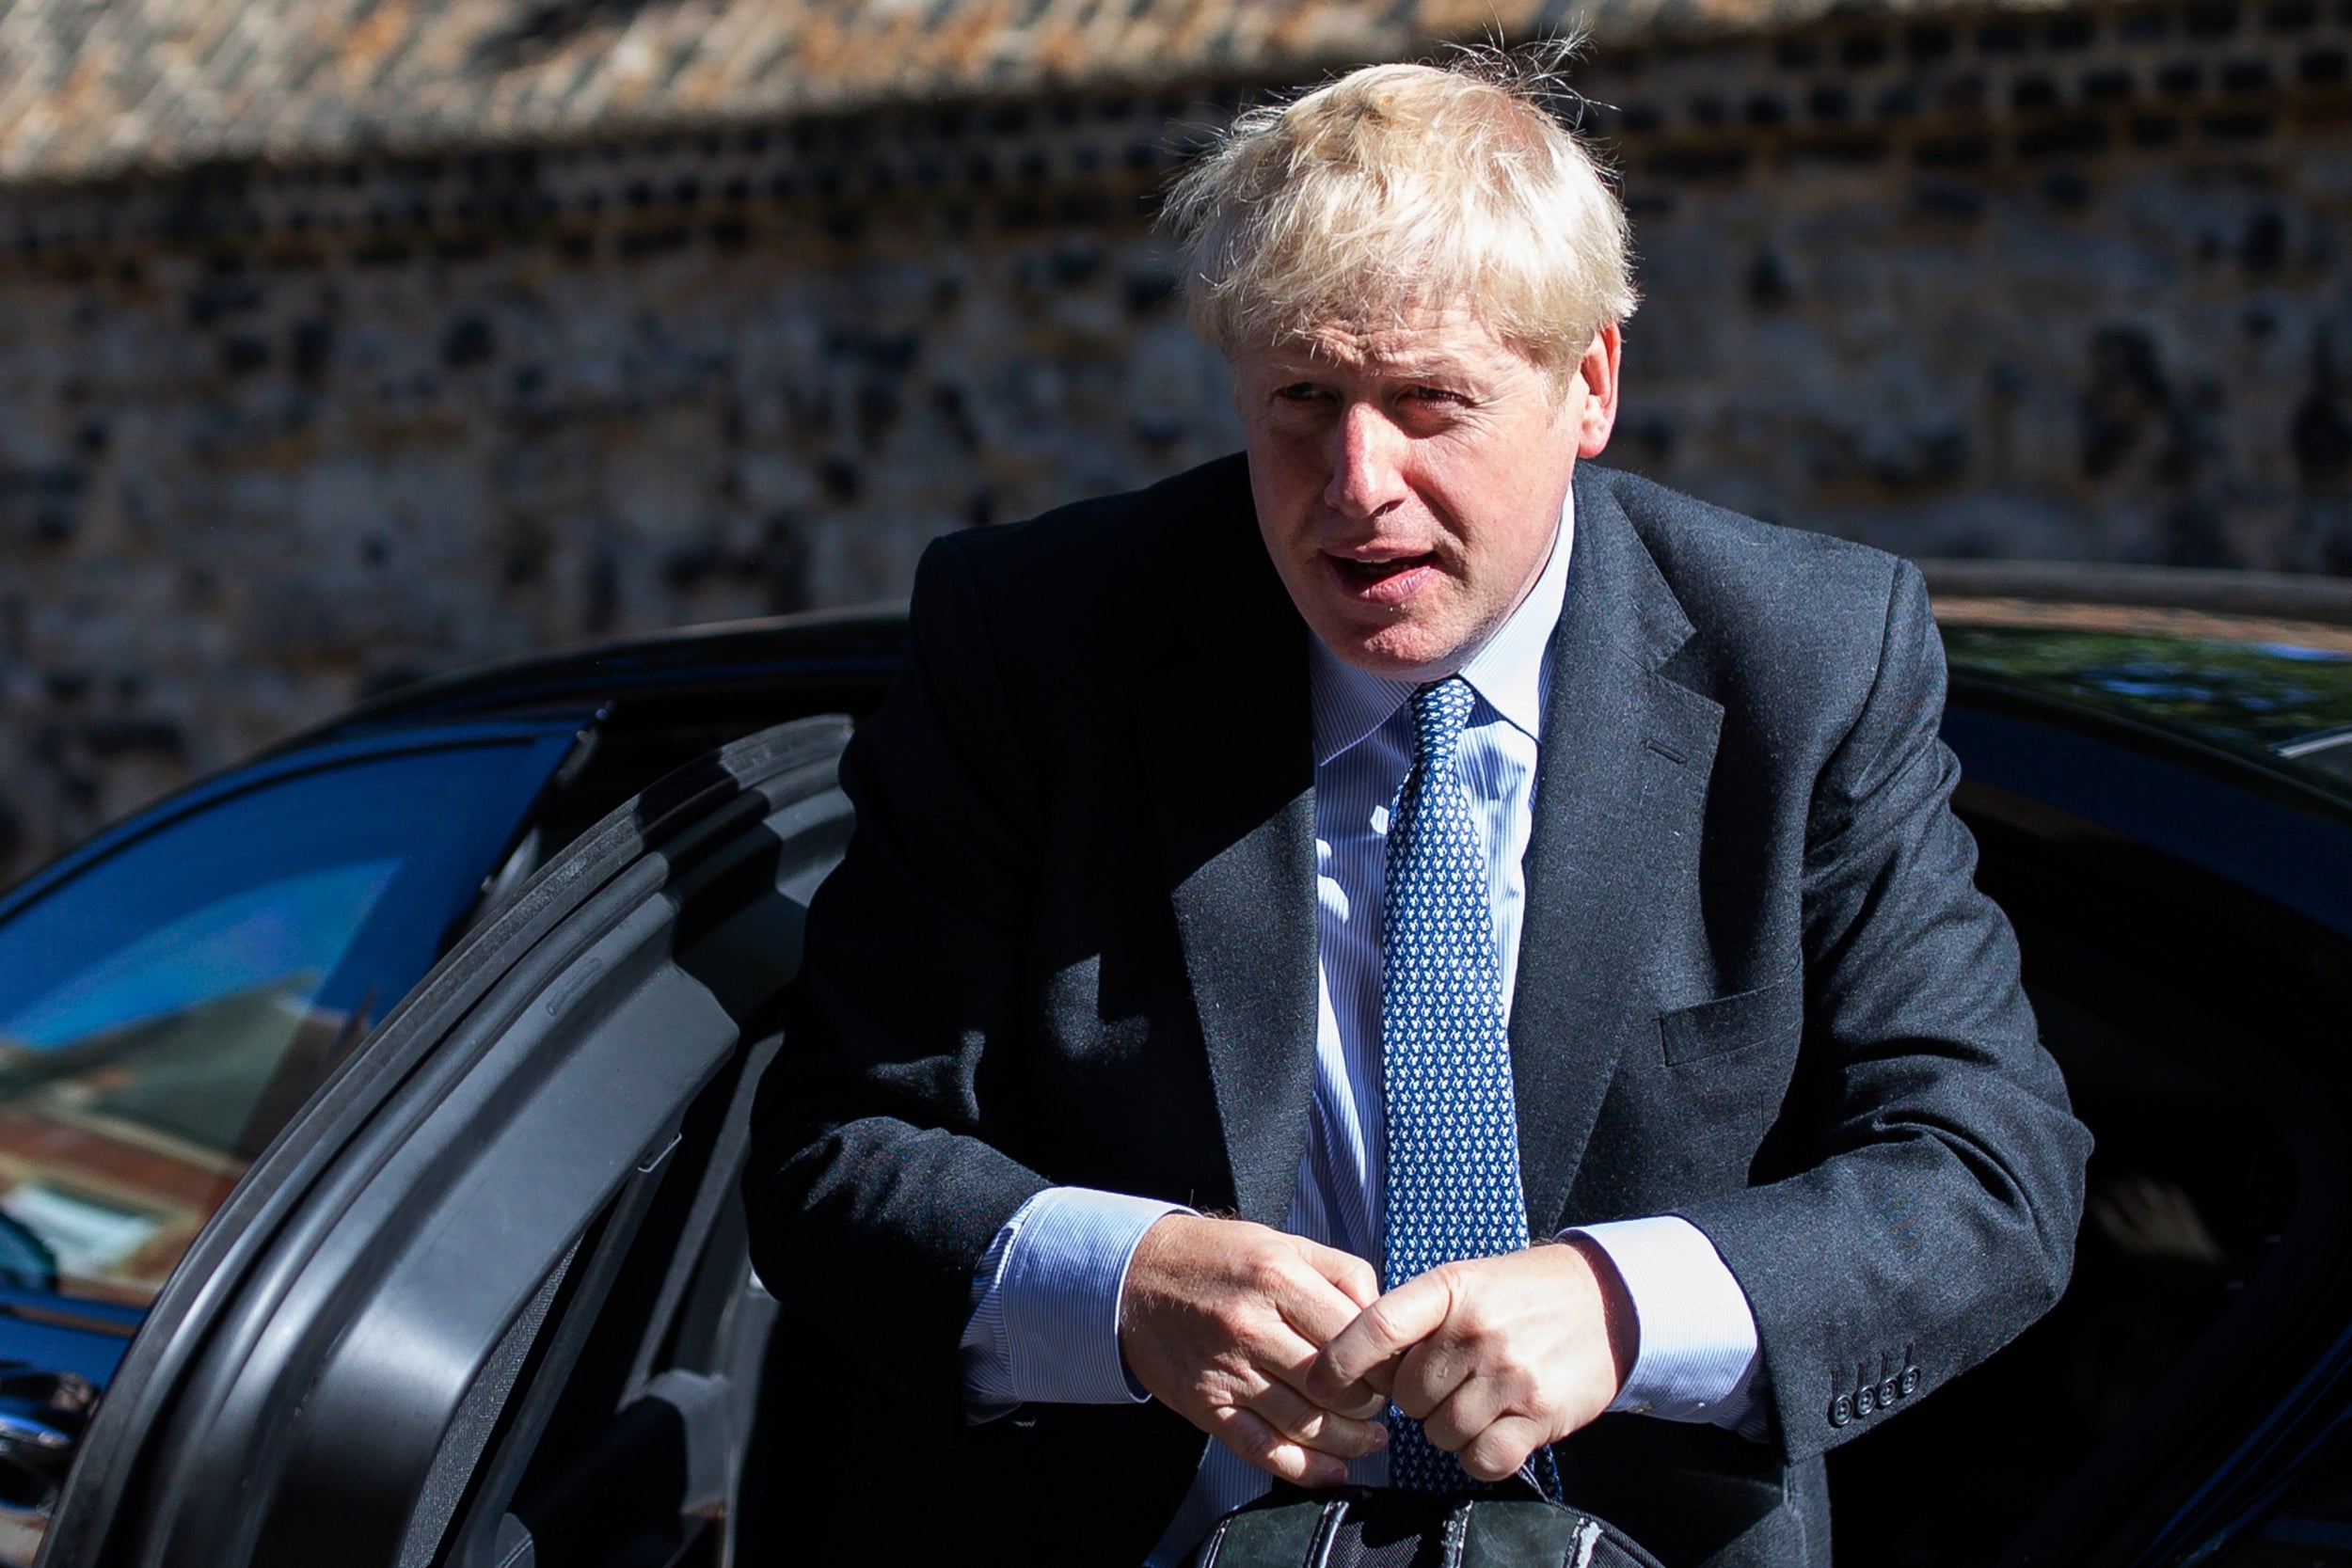 Tory leadership candidates Boris Johnson (pictured) and Jeremy Hunt were warned that no-deal Brexit threatens UK science